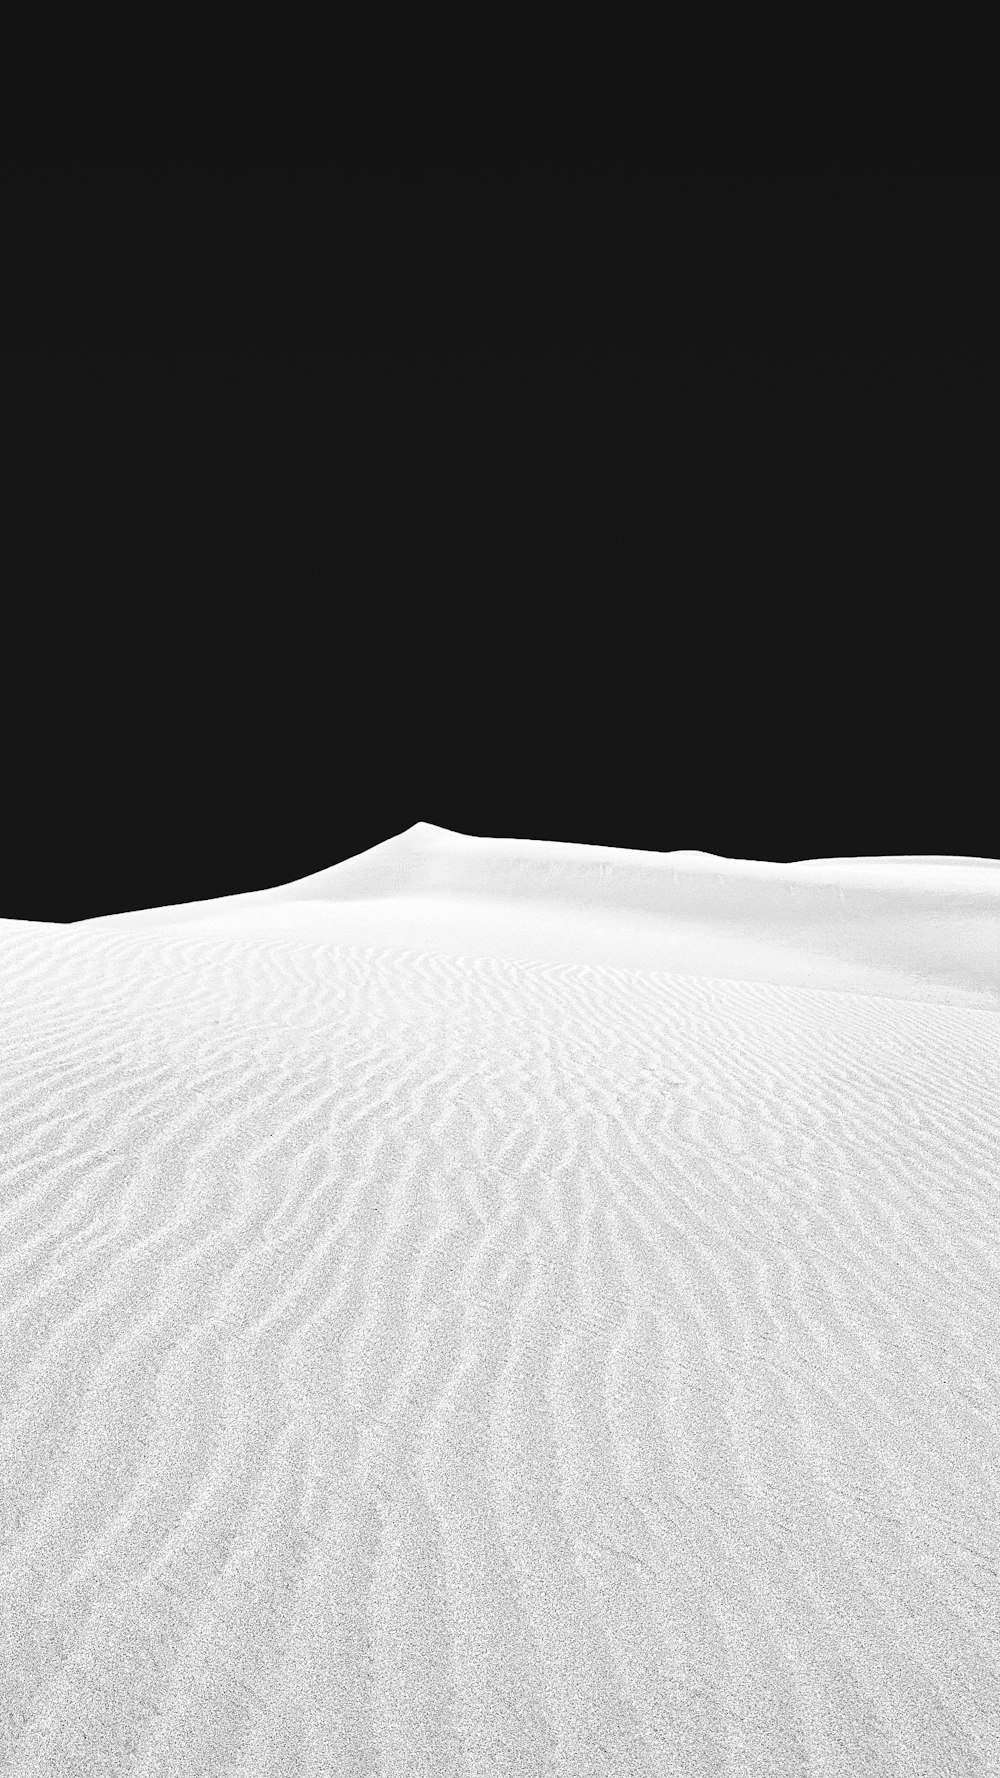 a black and white photo of a sand dune